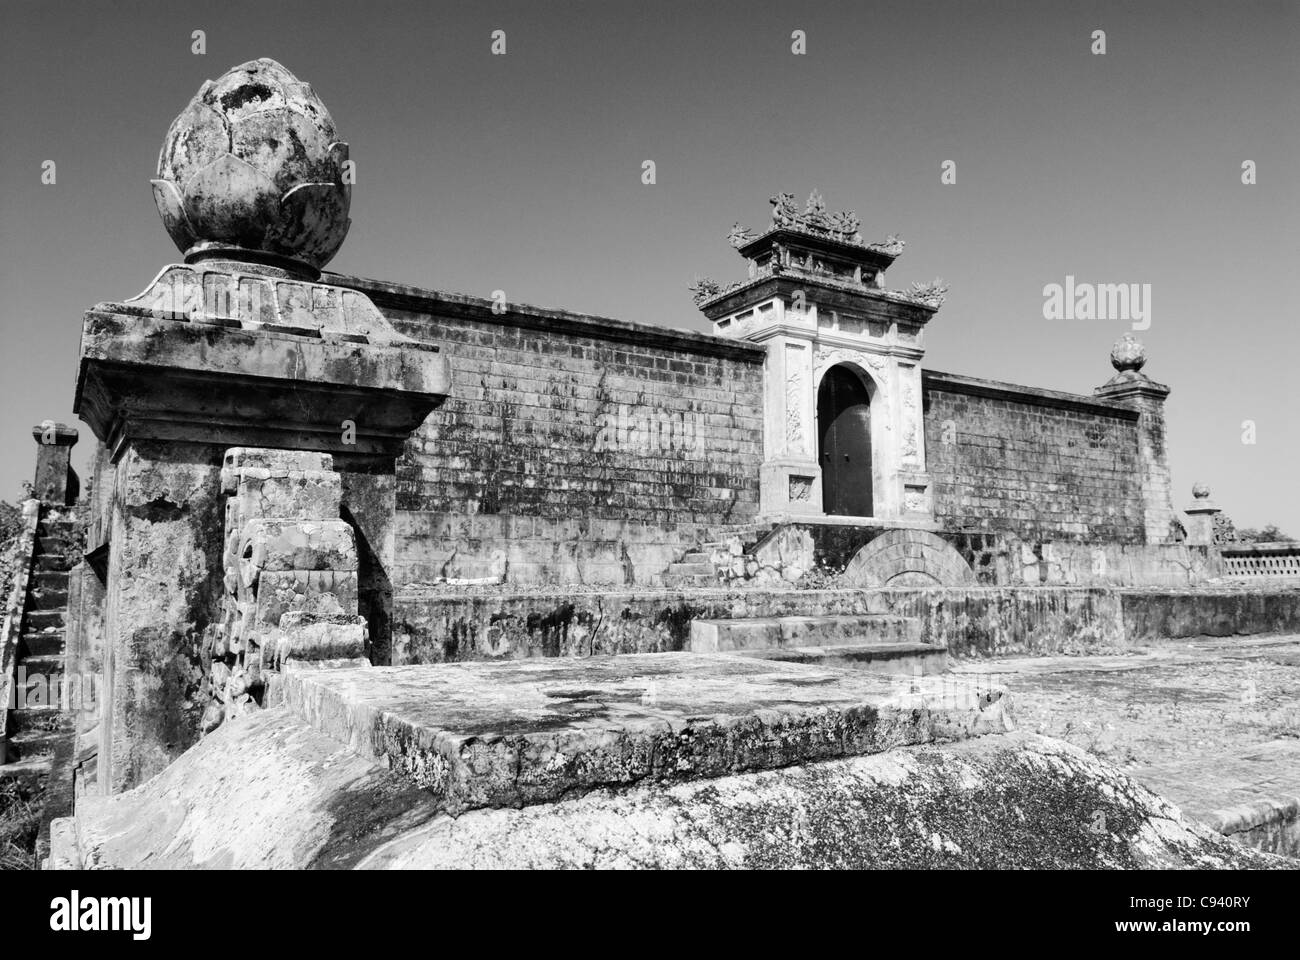 Asia, Vietnam, Hue. Royal tomb of Dong Khanh. Designated a UNESCO World Heritage Site in 1993, Hue is honoured for its complex.. Stock Photo